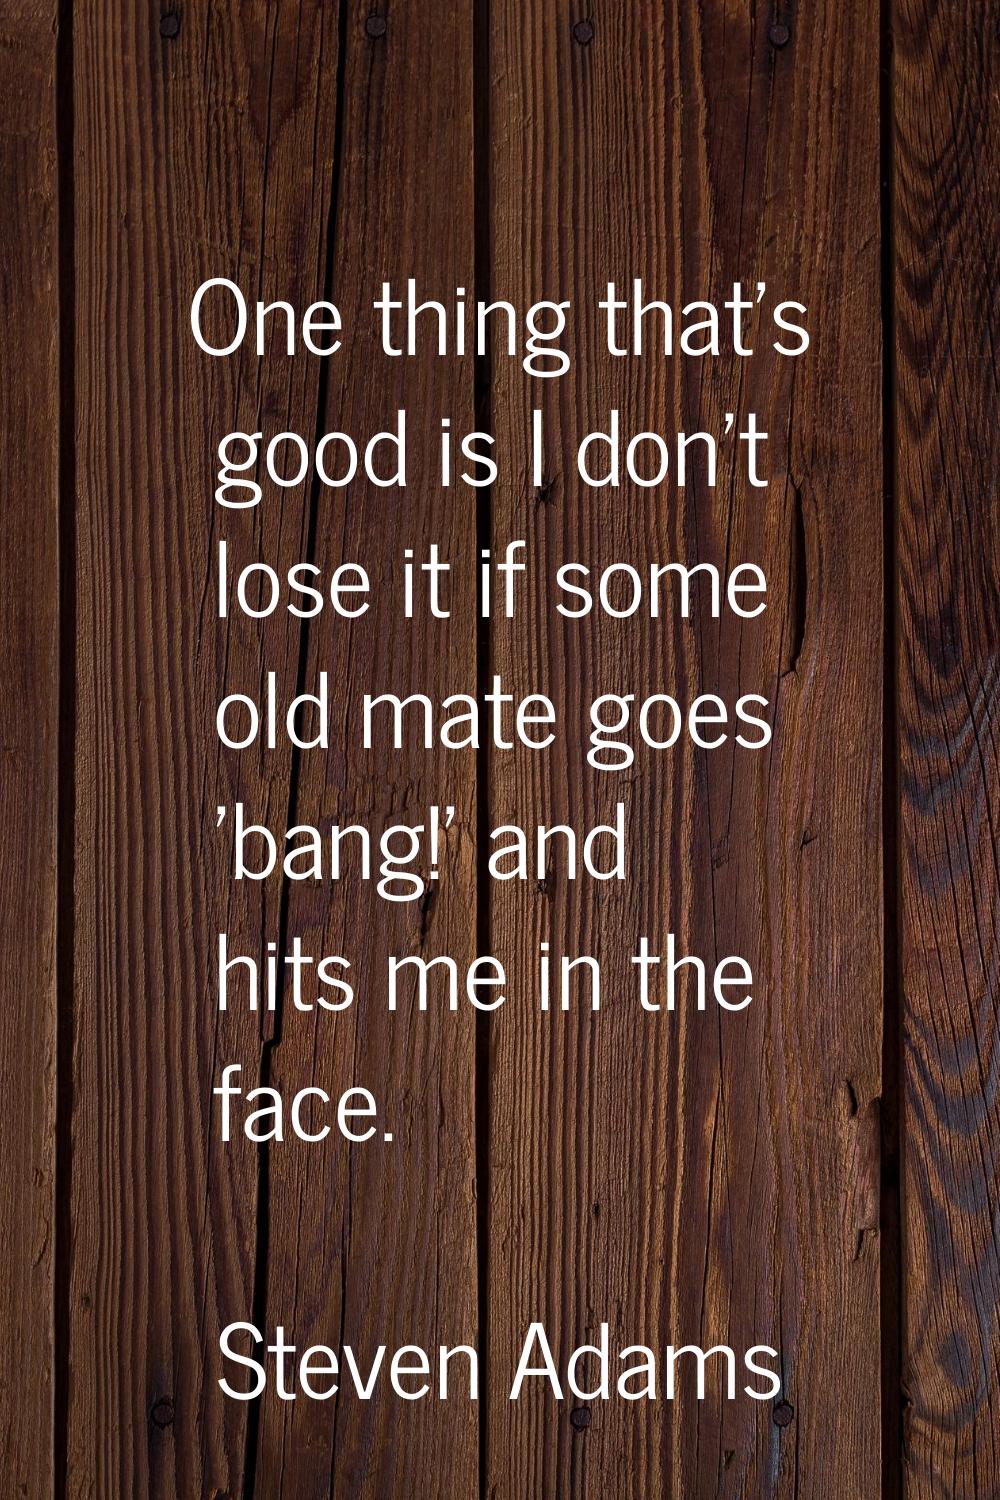 One thing that's good is I don't lose it if some old mate goes 'bang!' and hits me in the face.